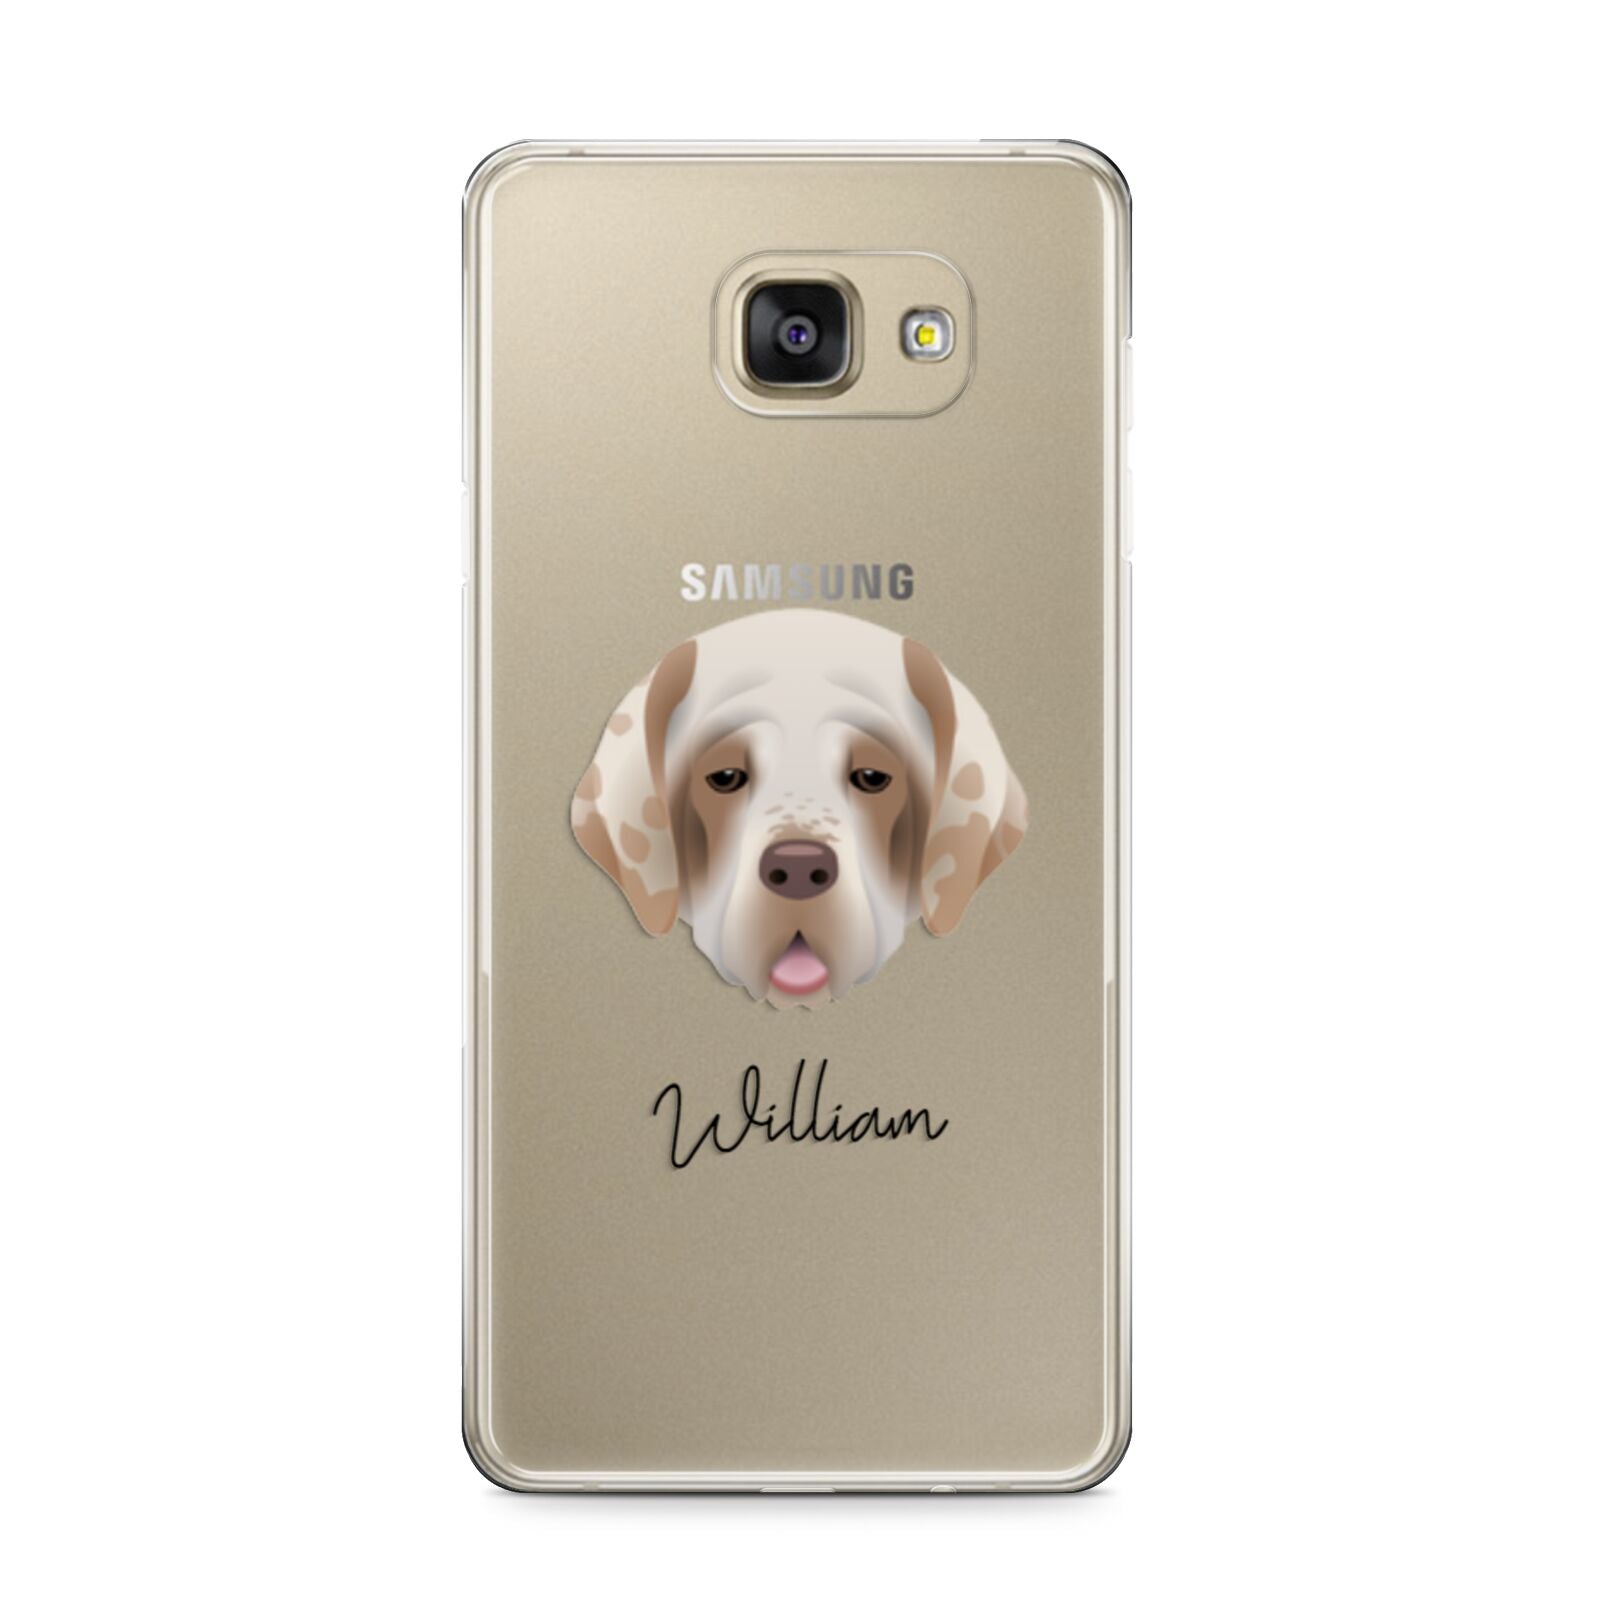 Cirneco Dell Etna Personalised Samsung Galaxy A9 2016 Case on gold phone